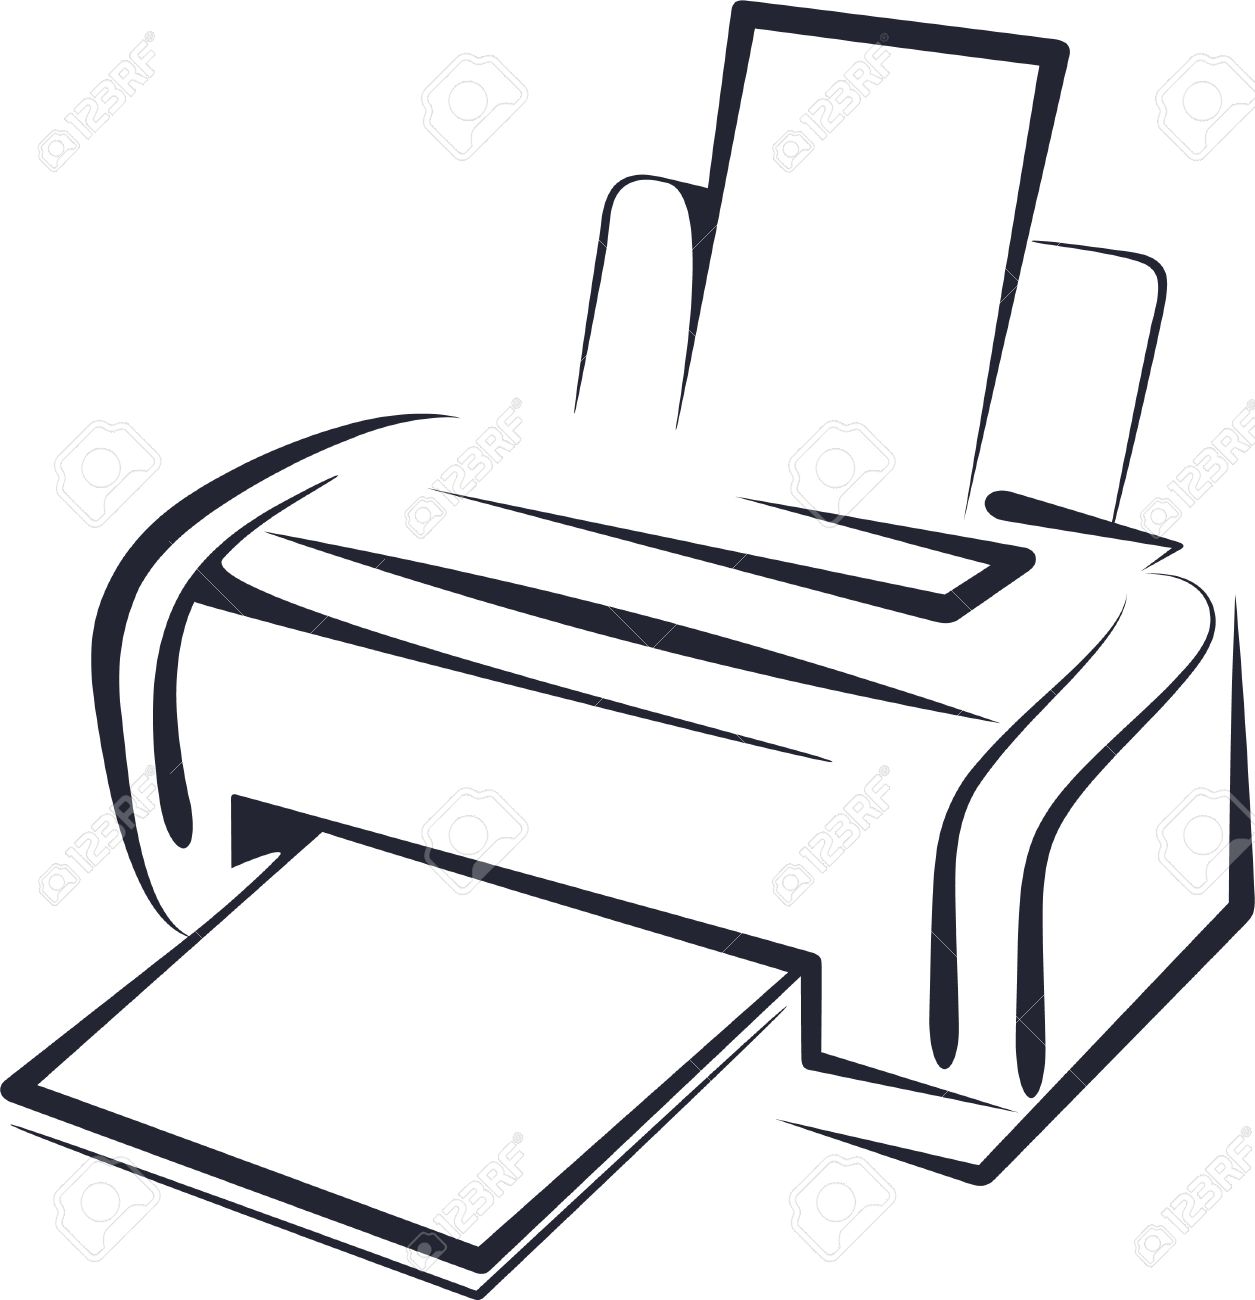 Collection of Printer clipart